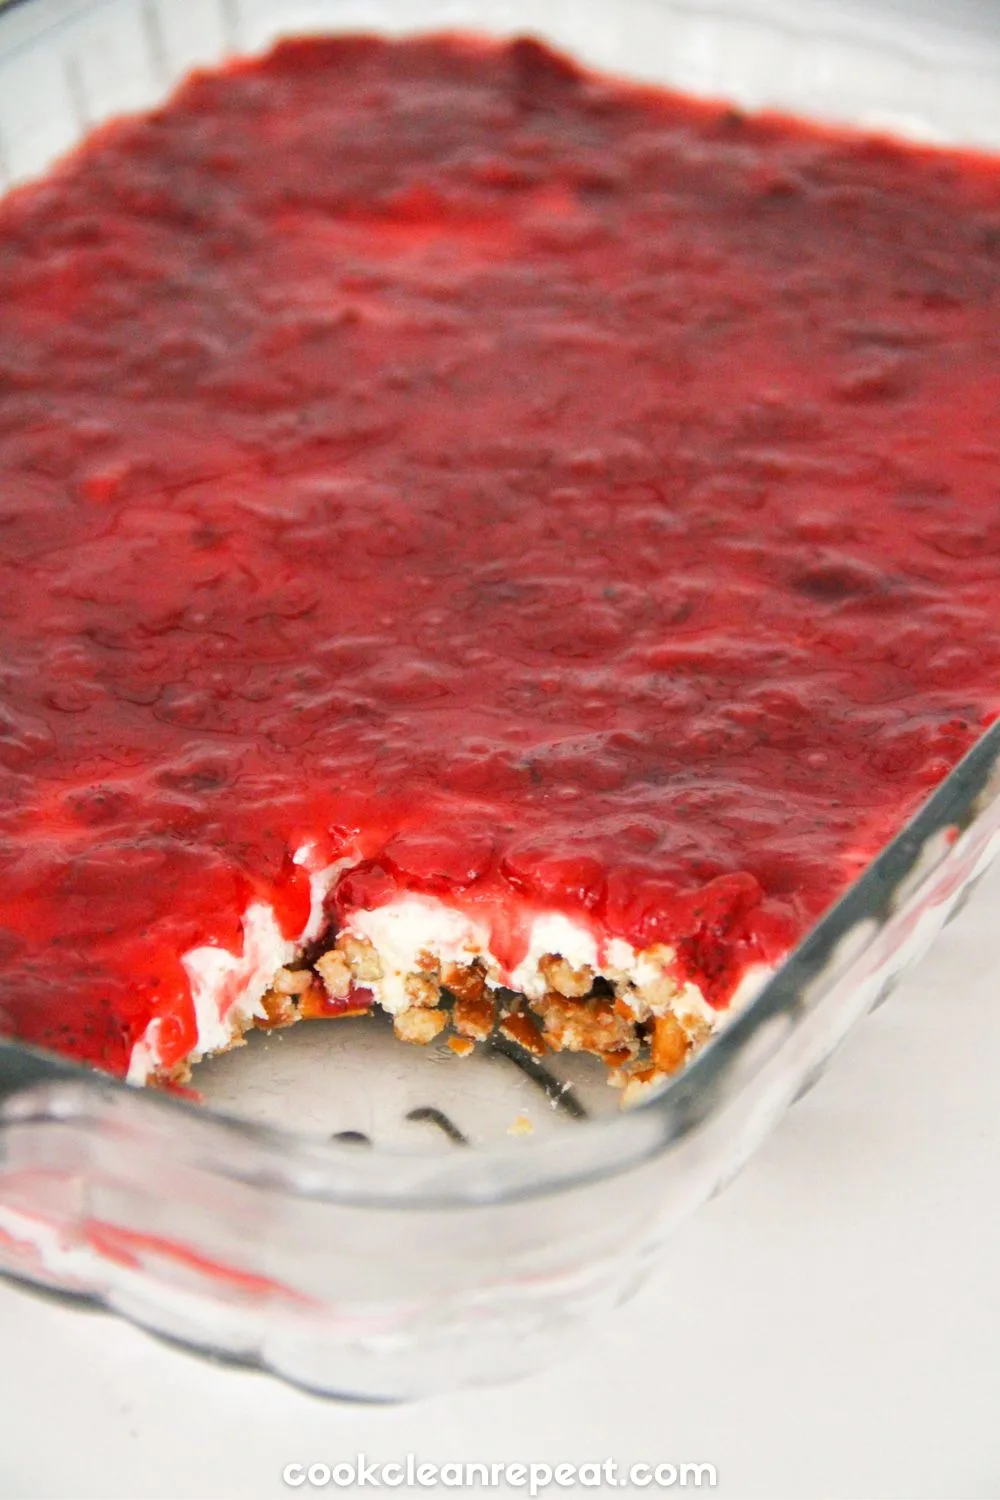 baking dish of strawberry pretzel salad with a slice cut out